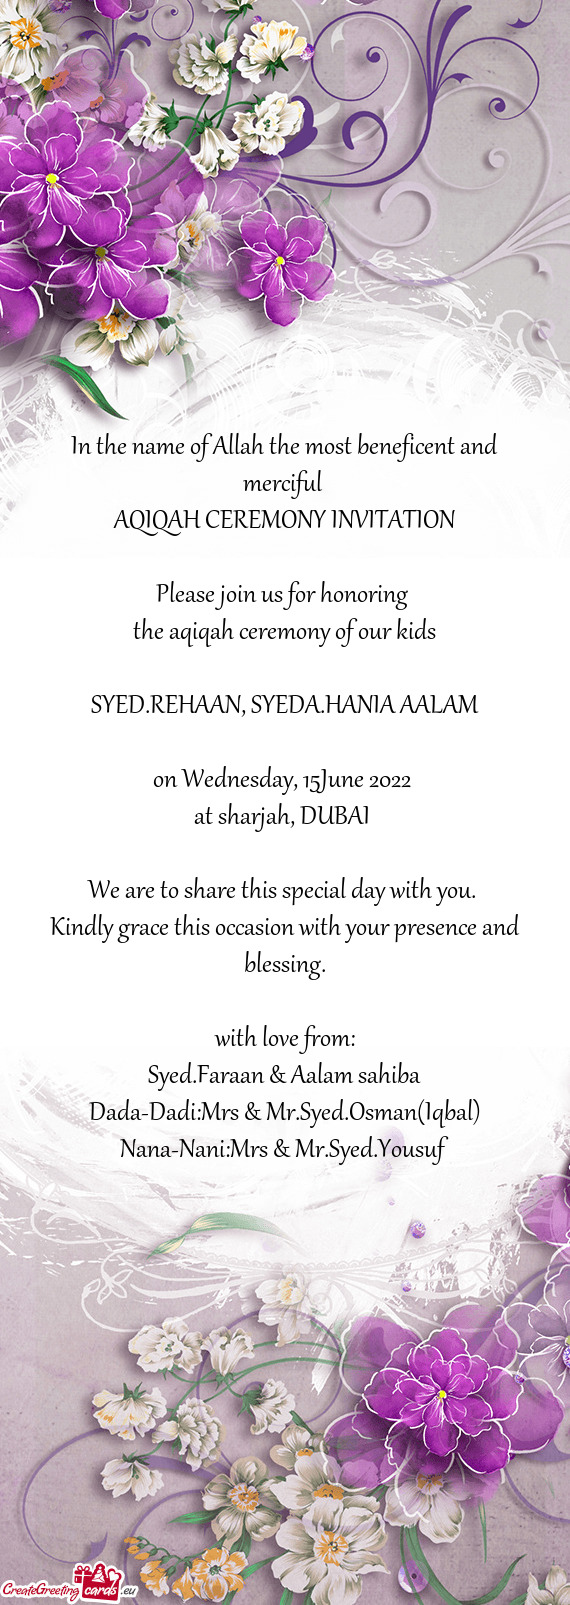 The aqiqah ceremony of our kids